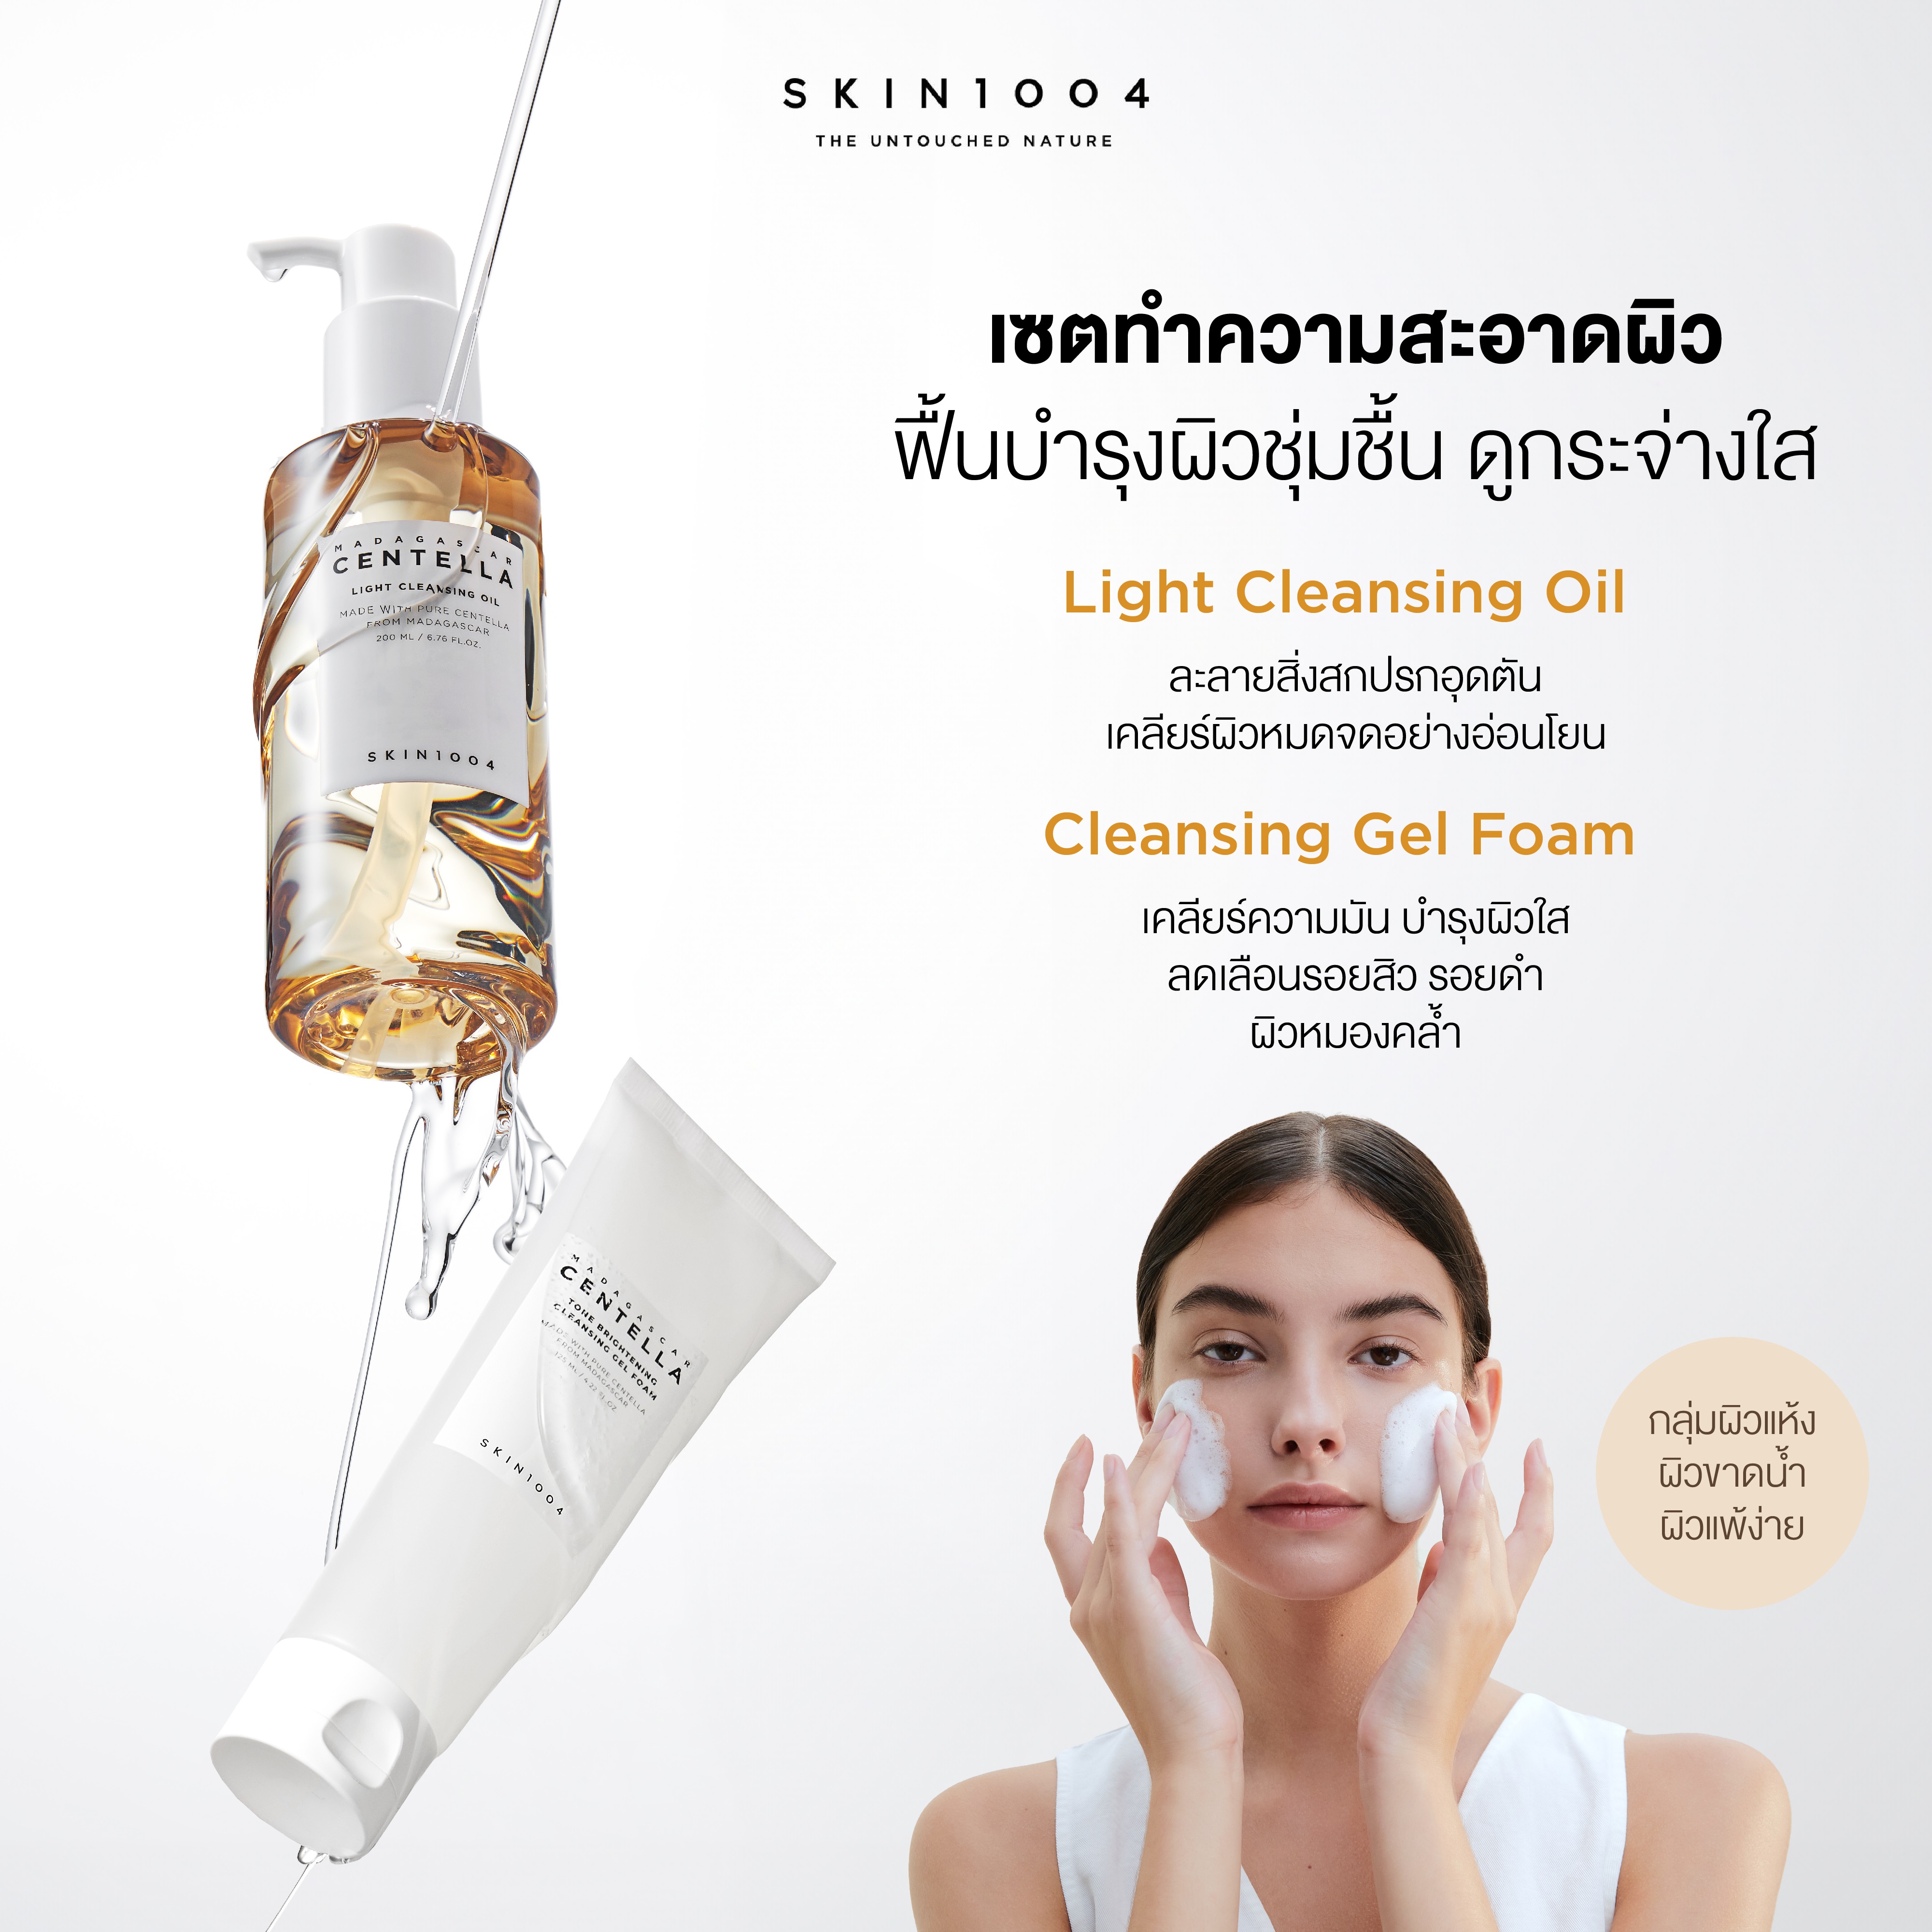 SKIN1004 Double Cleansing